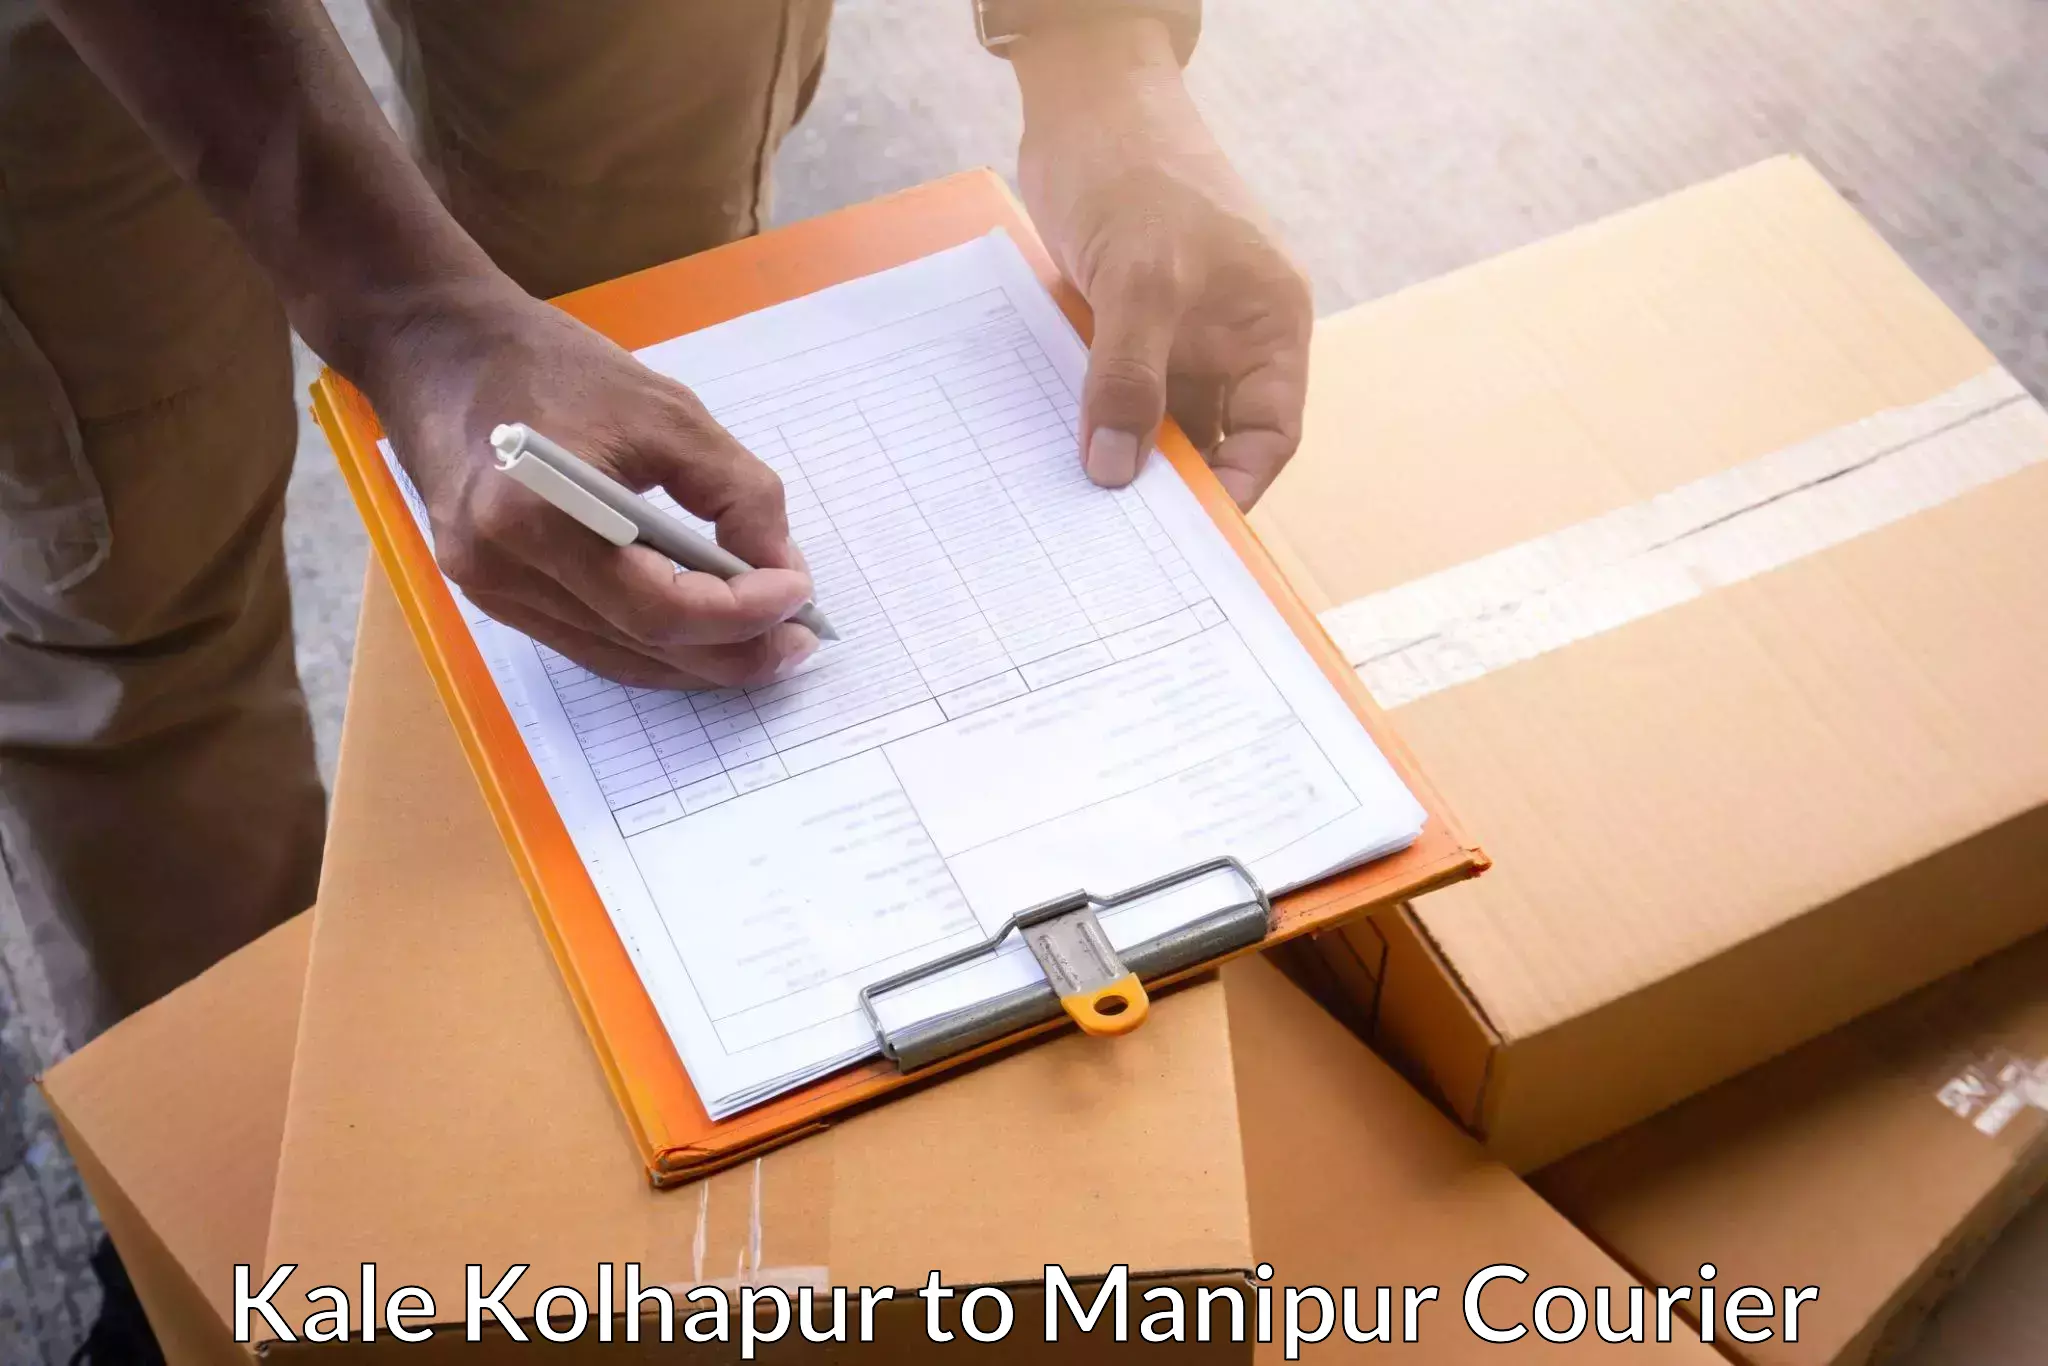 Pharmaceutical courier in Kale Kolhapur to Chandel